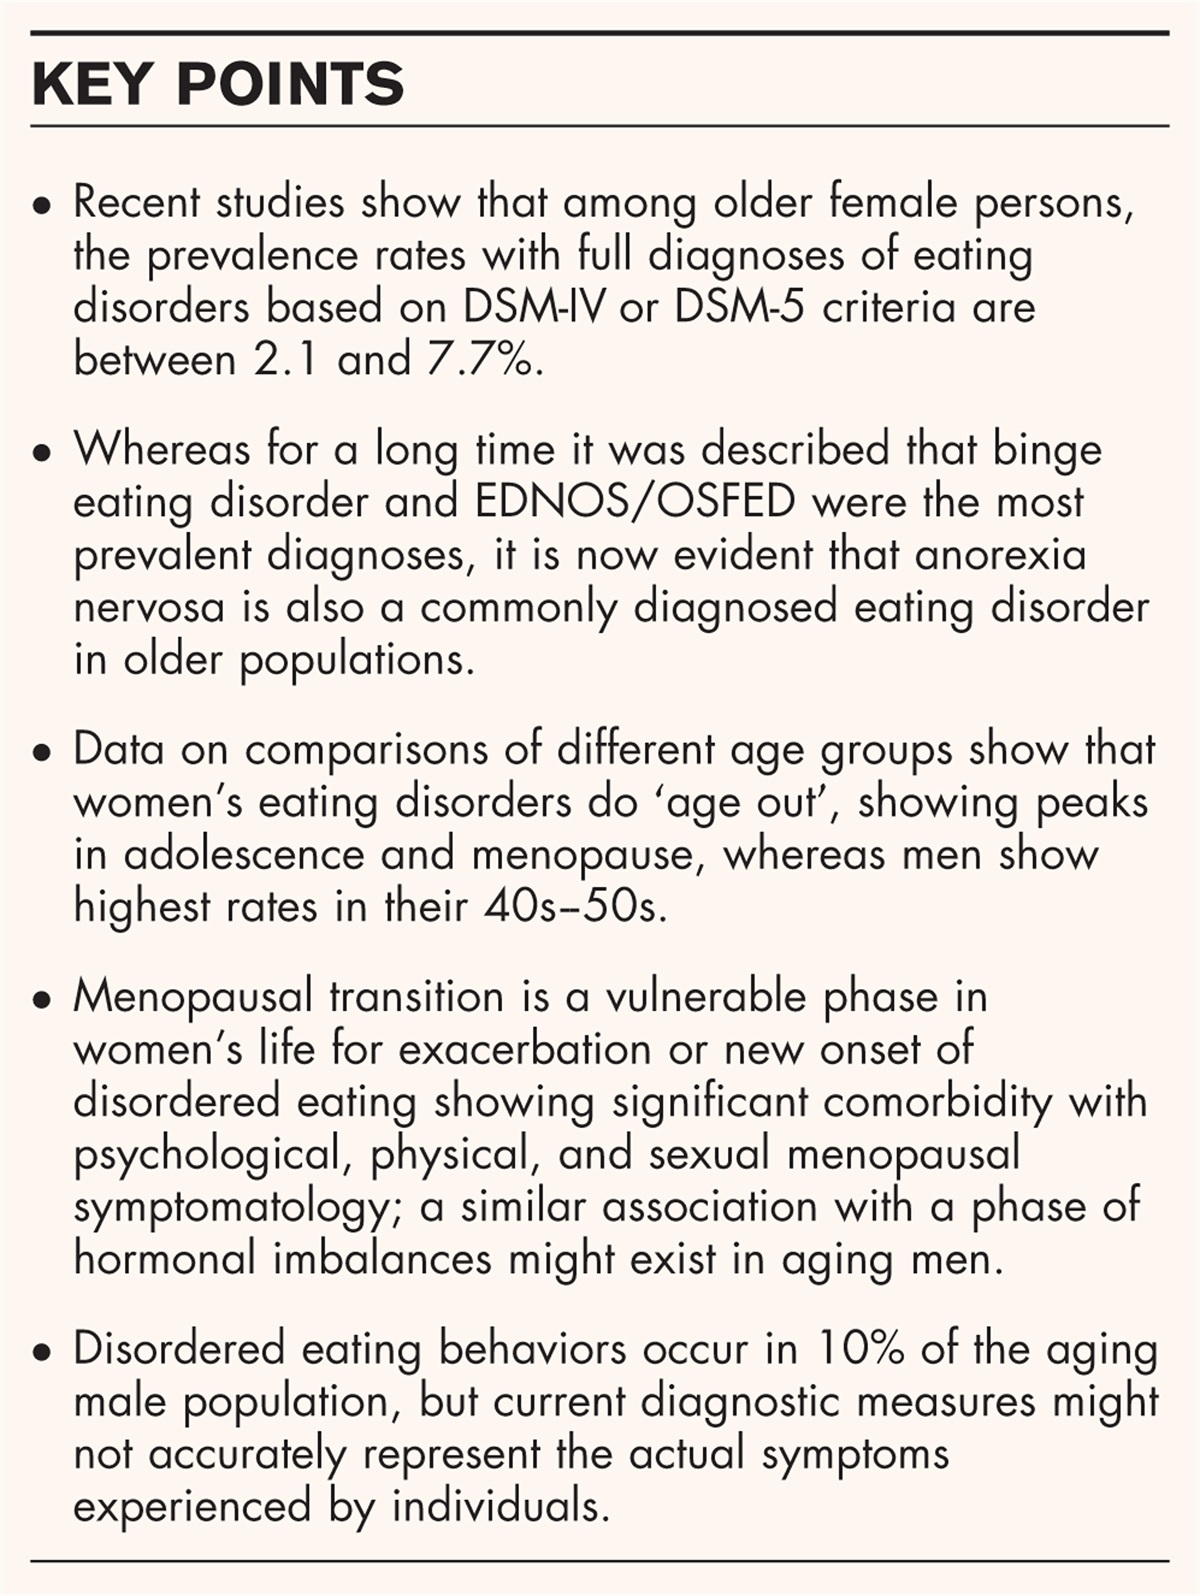 Update on the epidemiology and treatment of eating disorders among older people